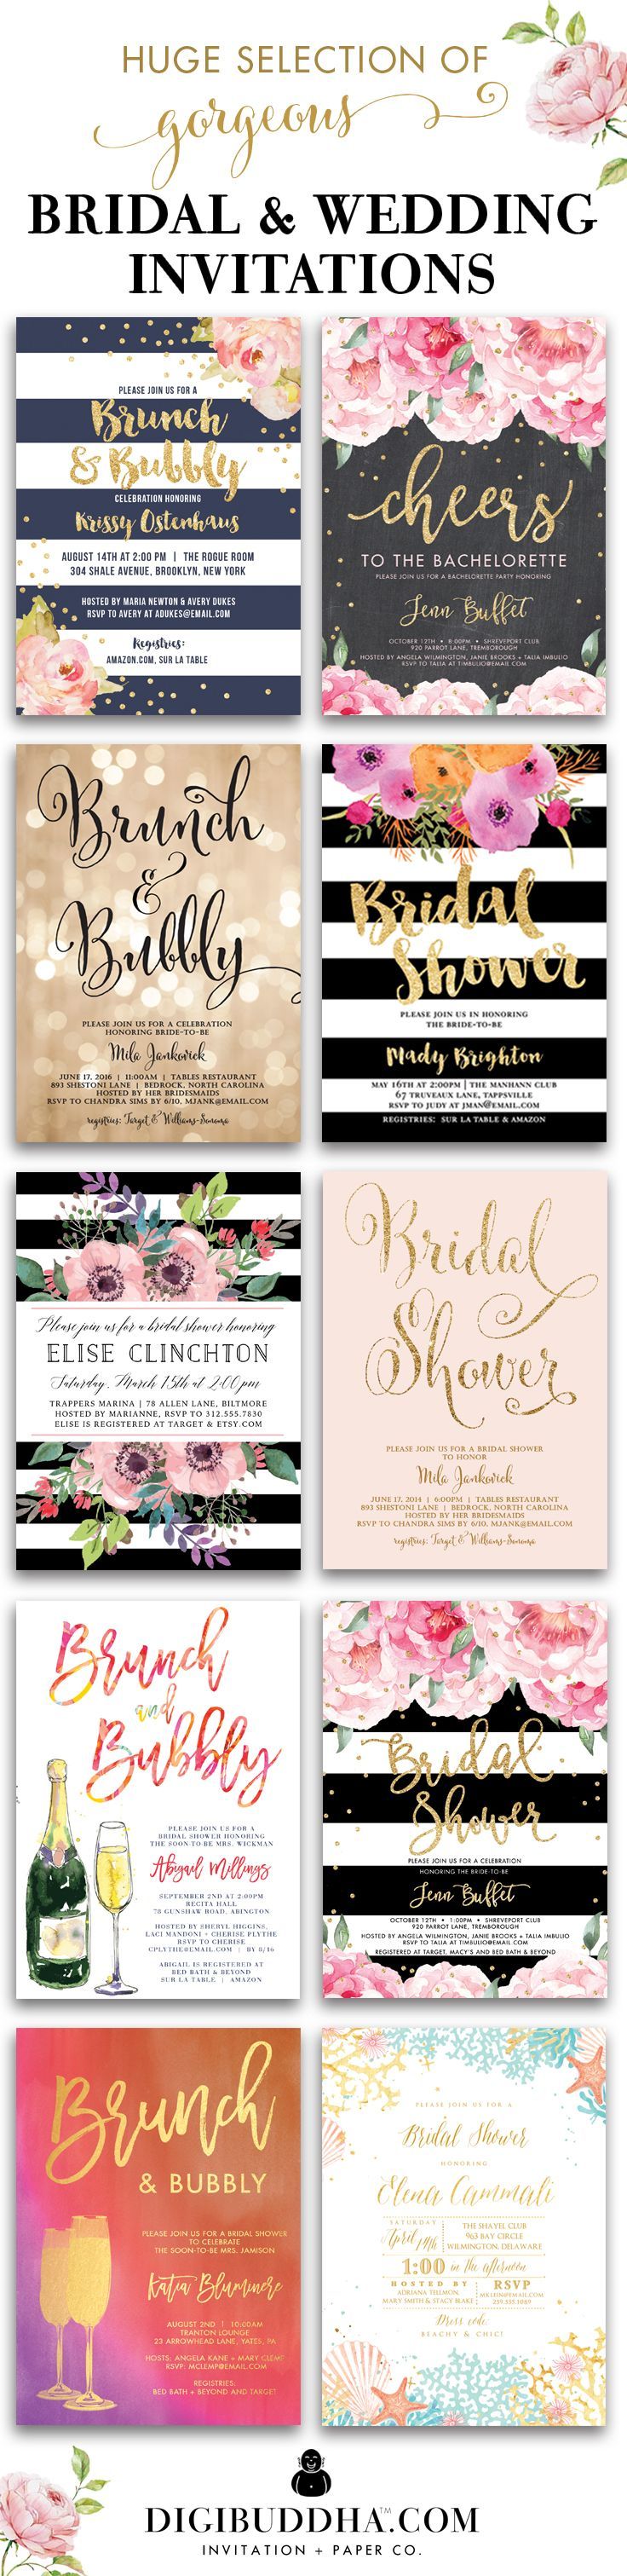 Huge selection of original trend-setting bridal shower invitations and wedding inv